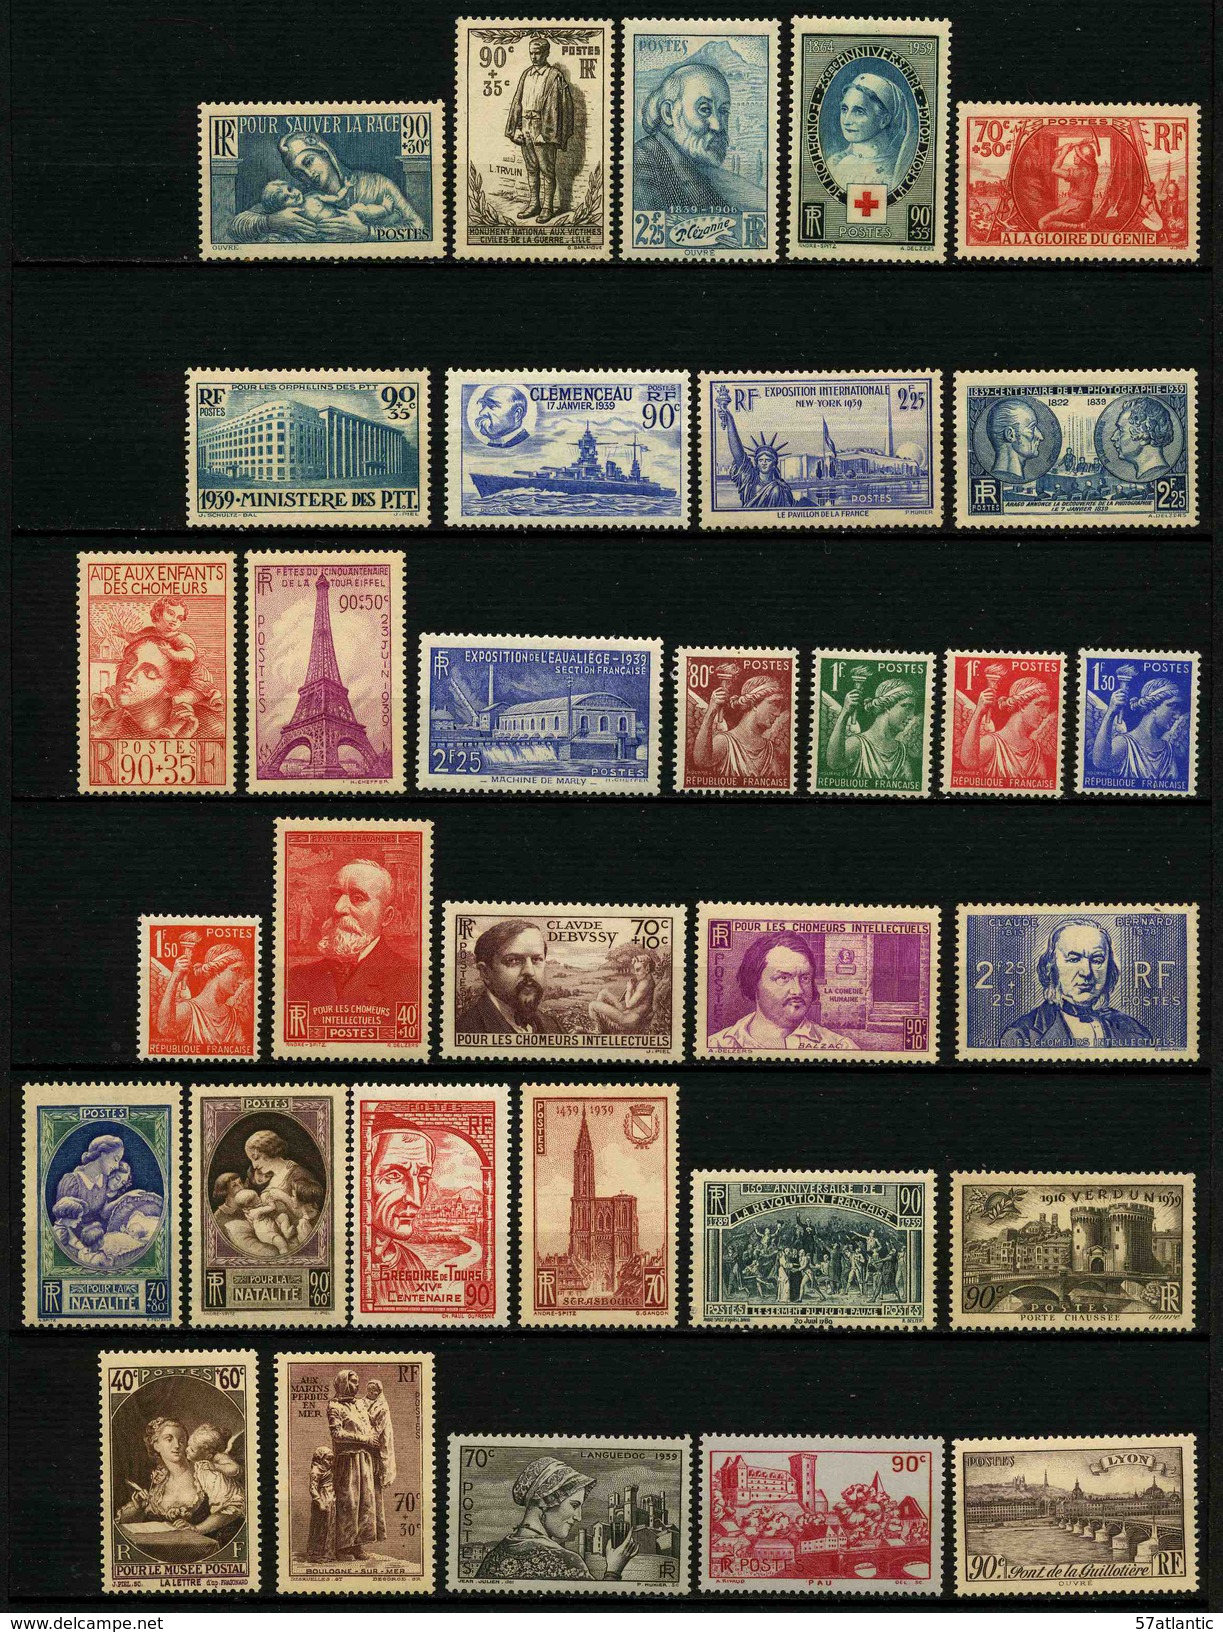 FRANCE - ANNEE COMPLETE 1939 - YT 419 à 450 ** - 32 TIMBRES NEUFS ** - 1940-1949